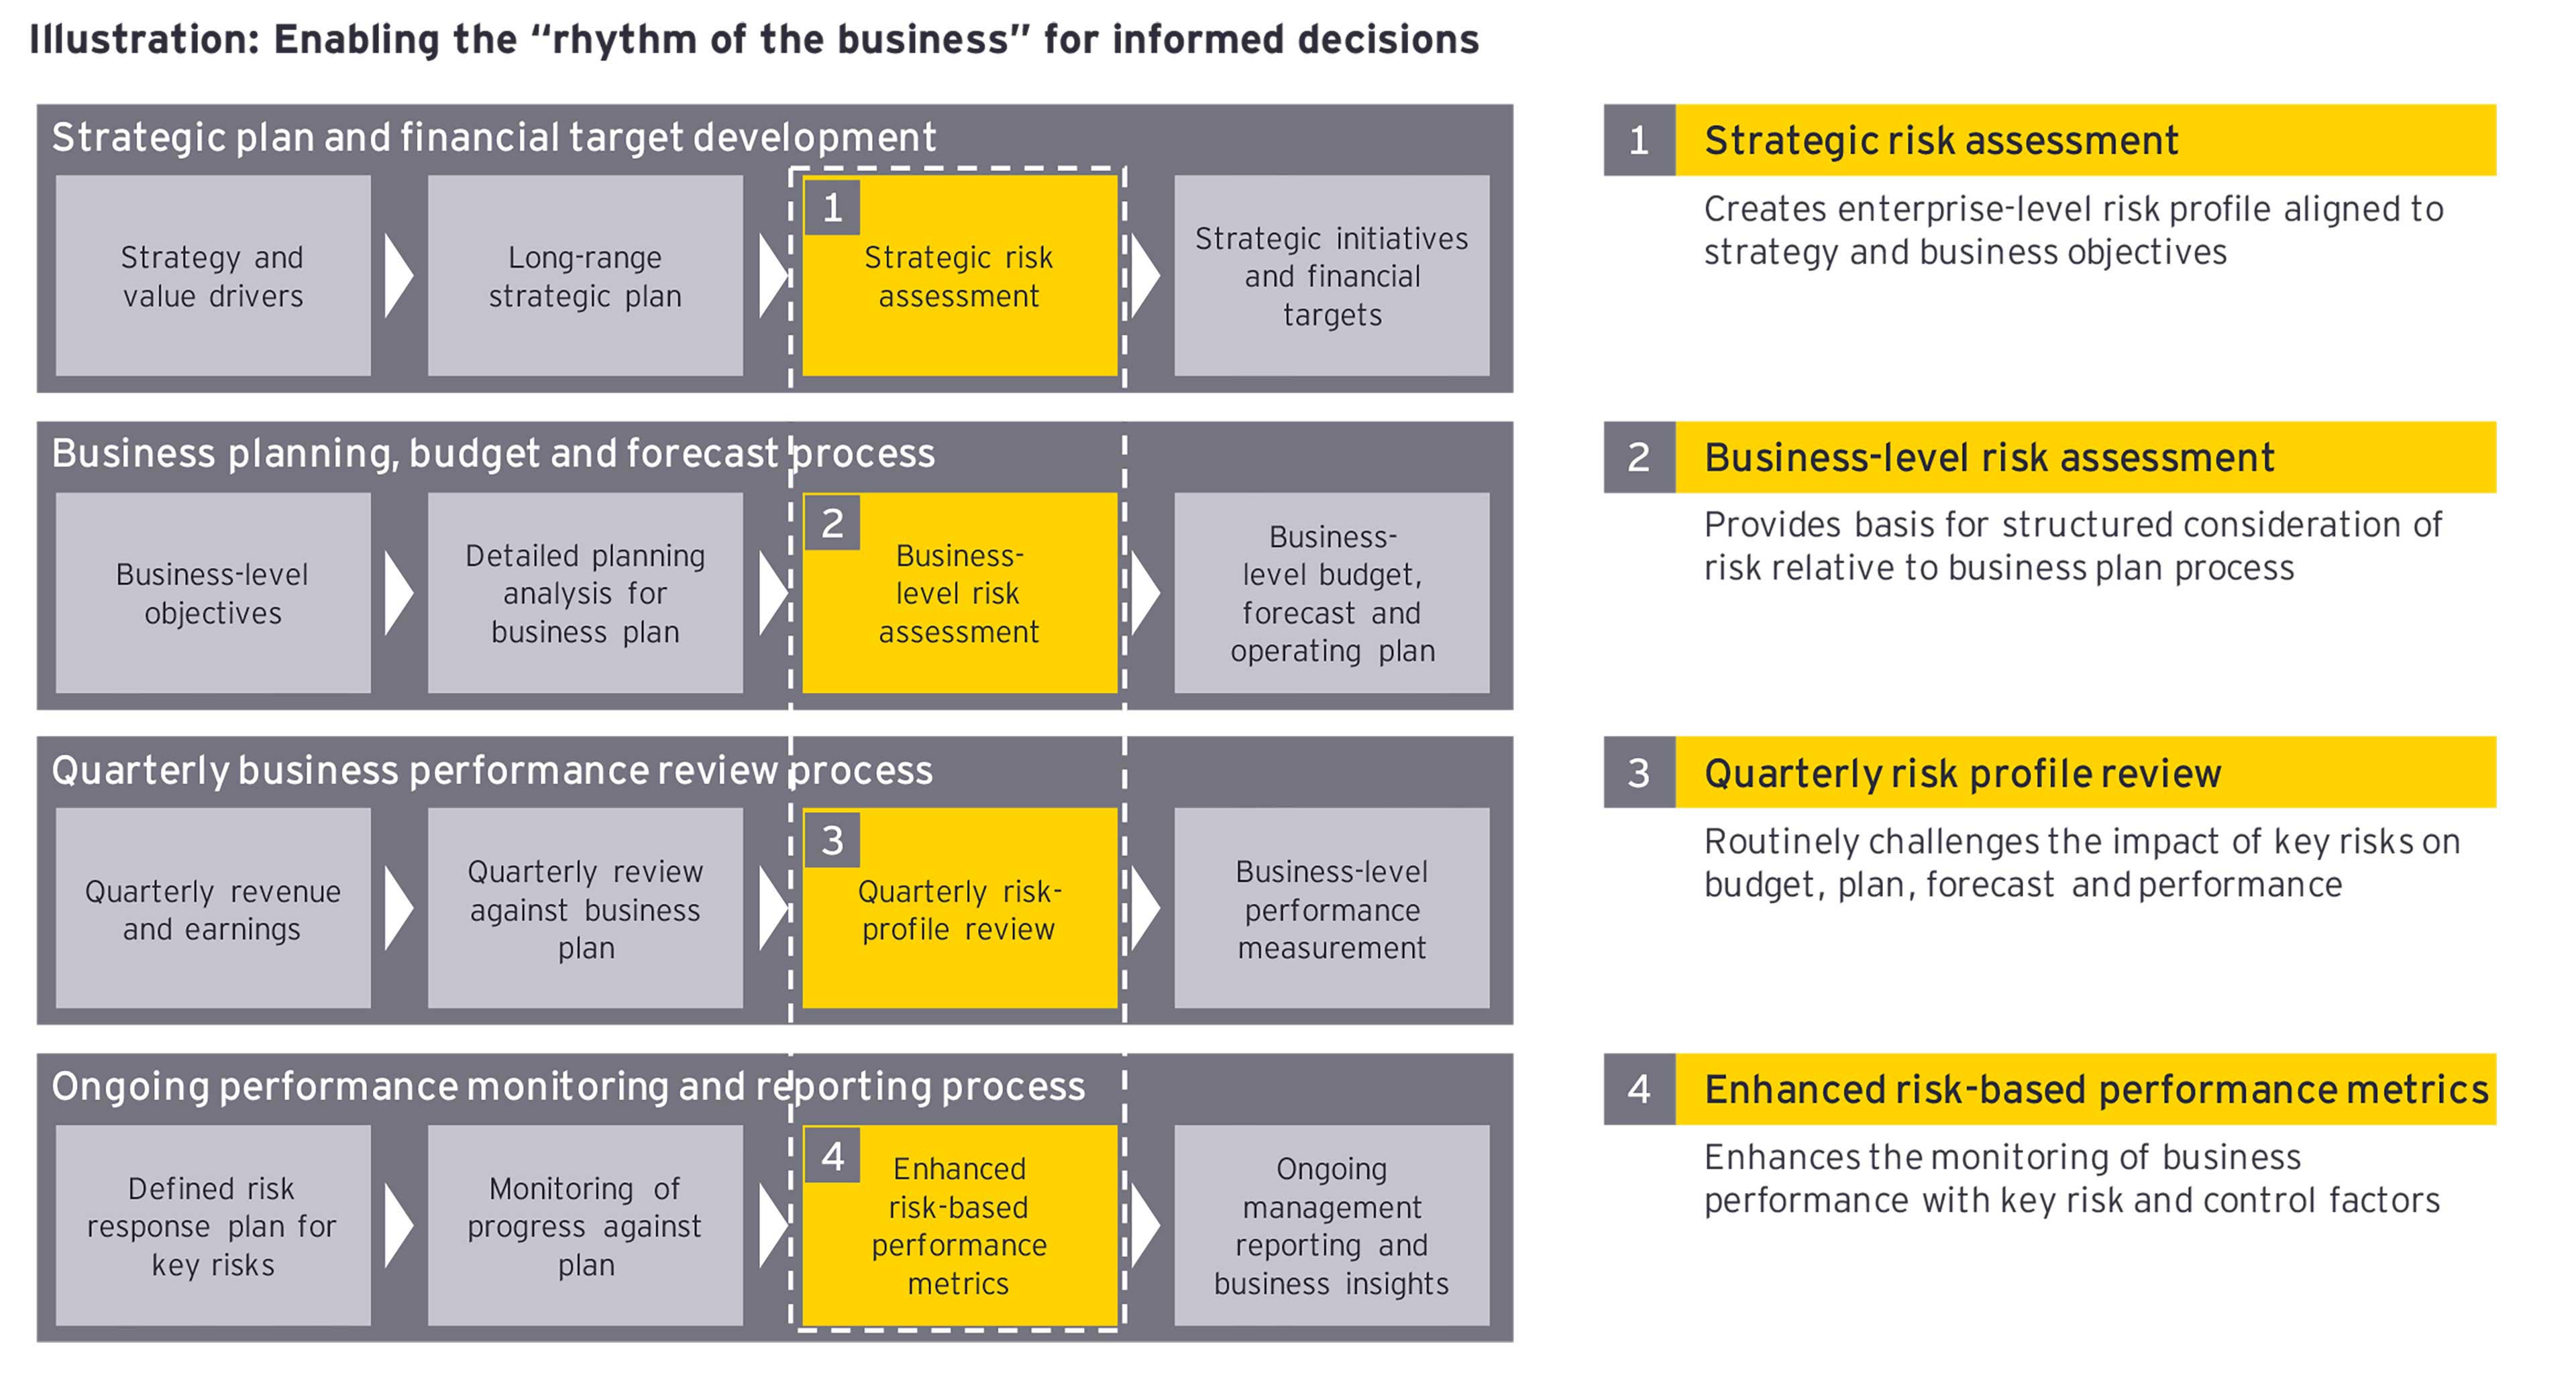 Enabling the "rhythm of the business"